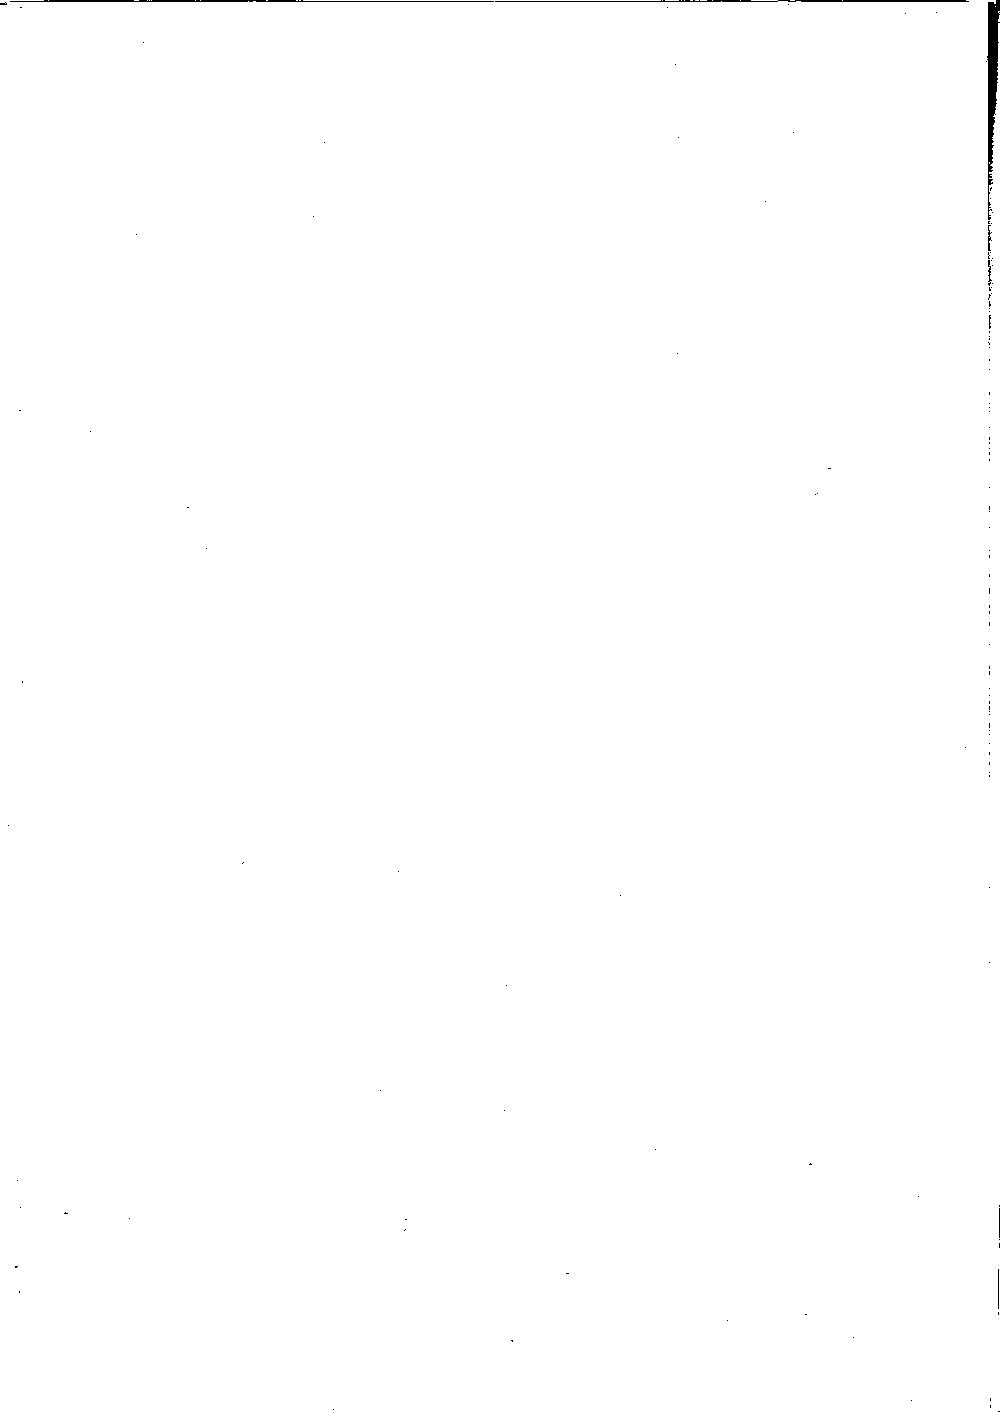 Scan of page 486